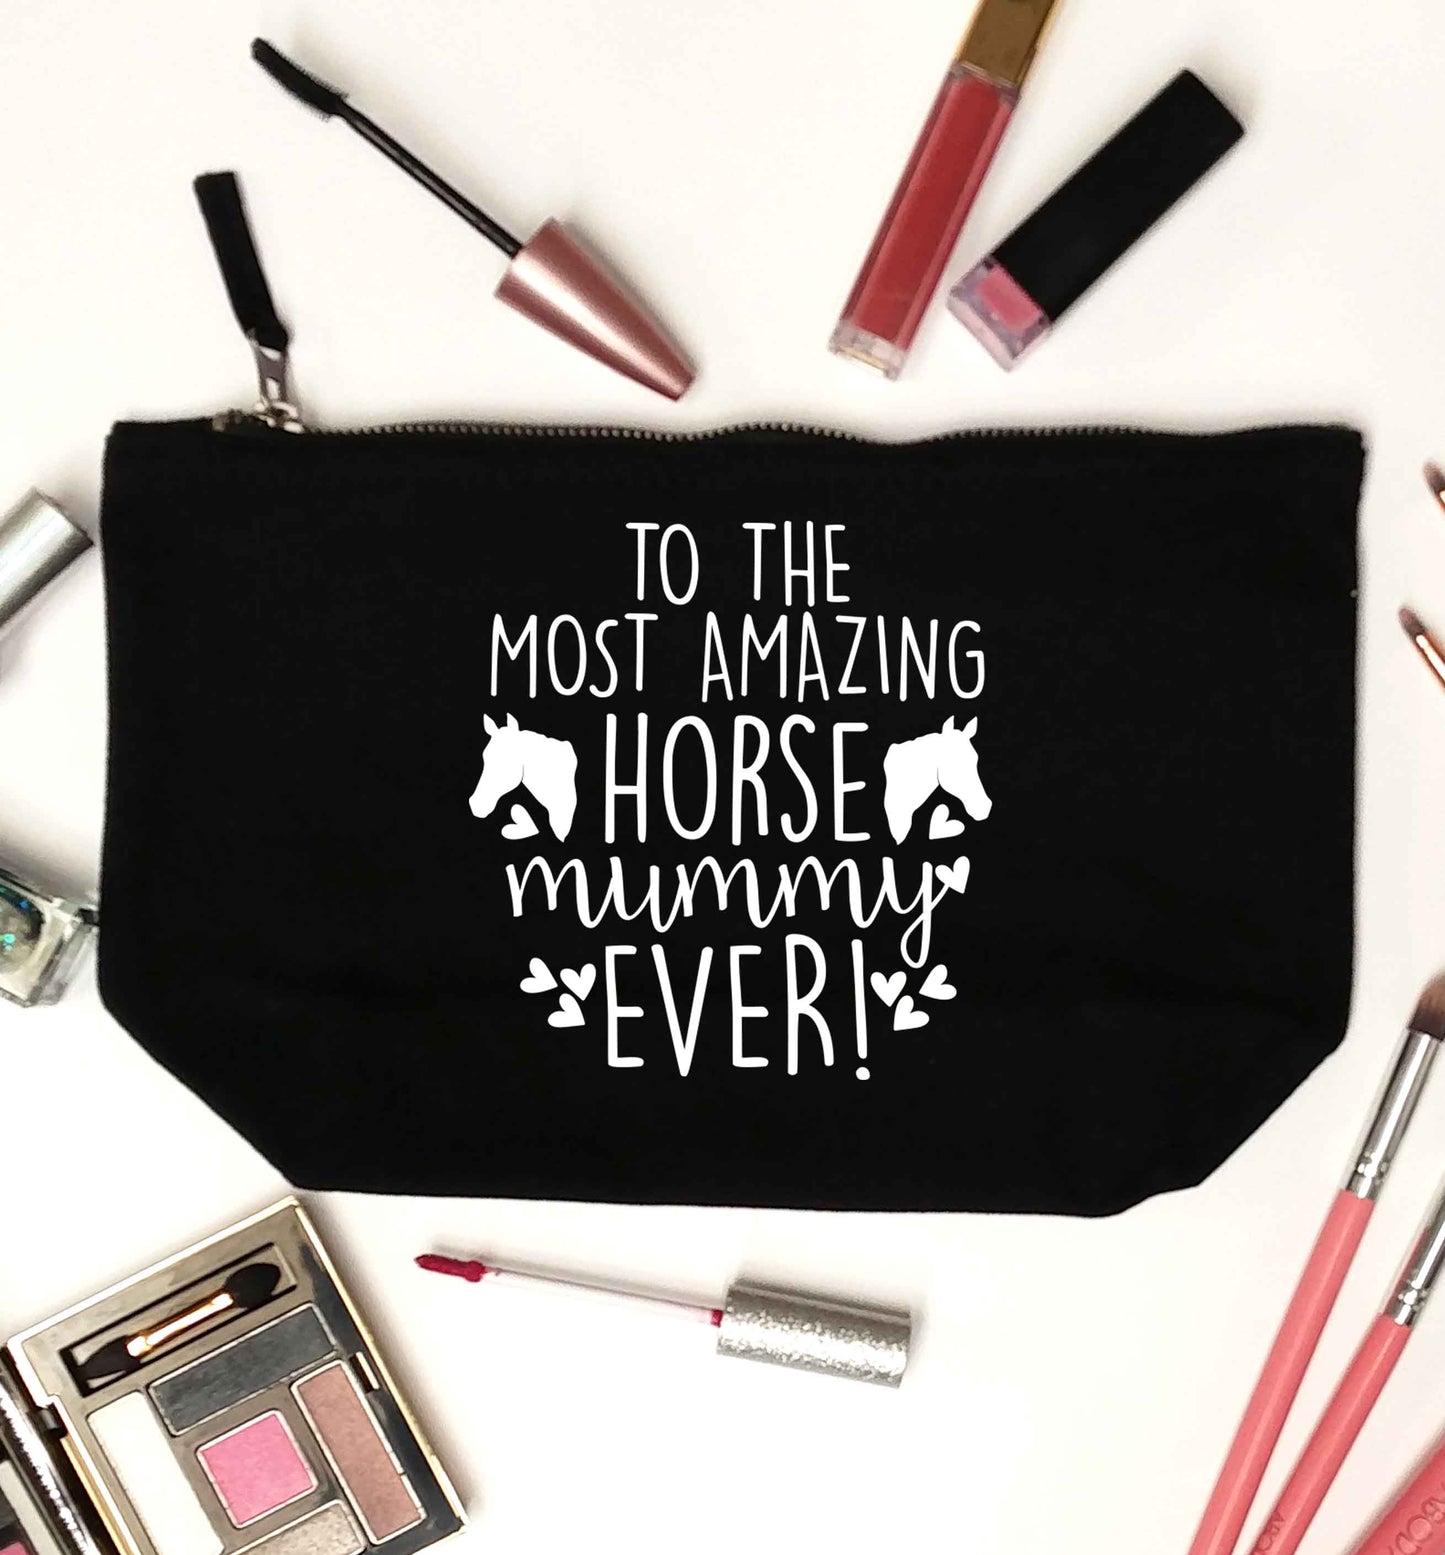 To the most amazing horse mummy ever! black makeup bag